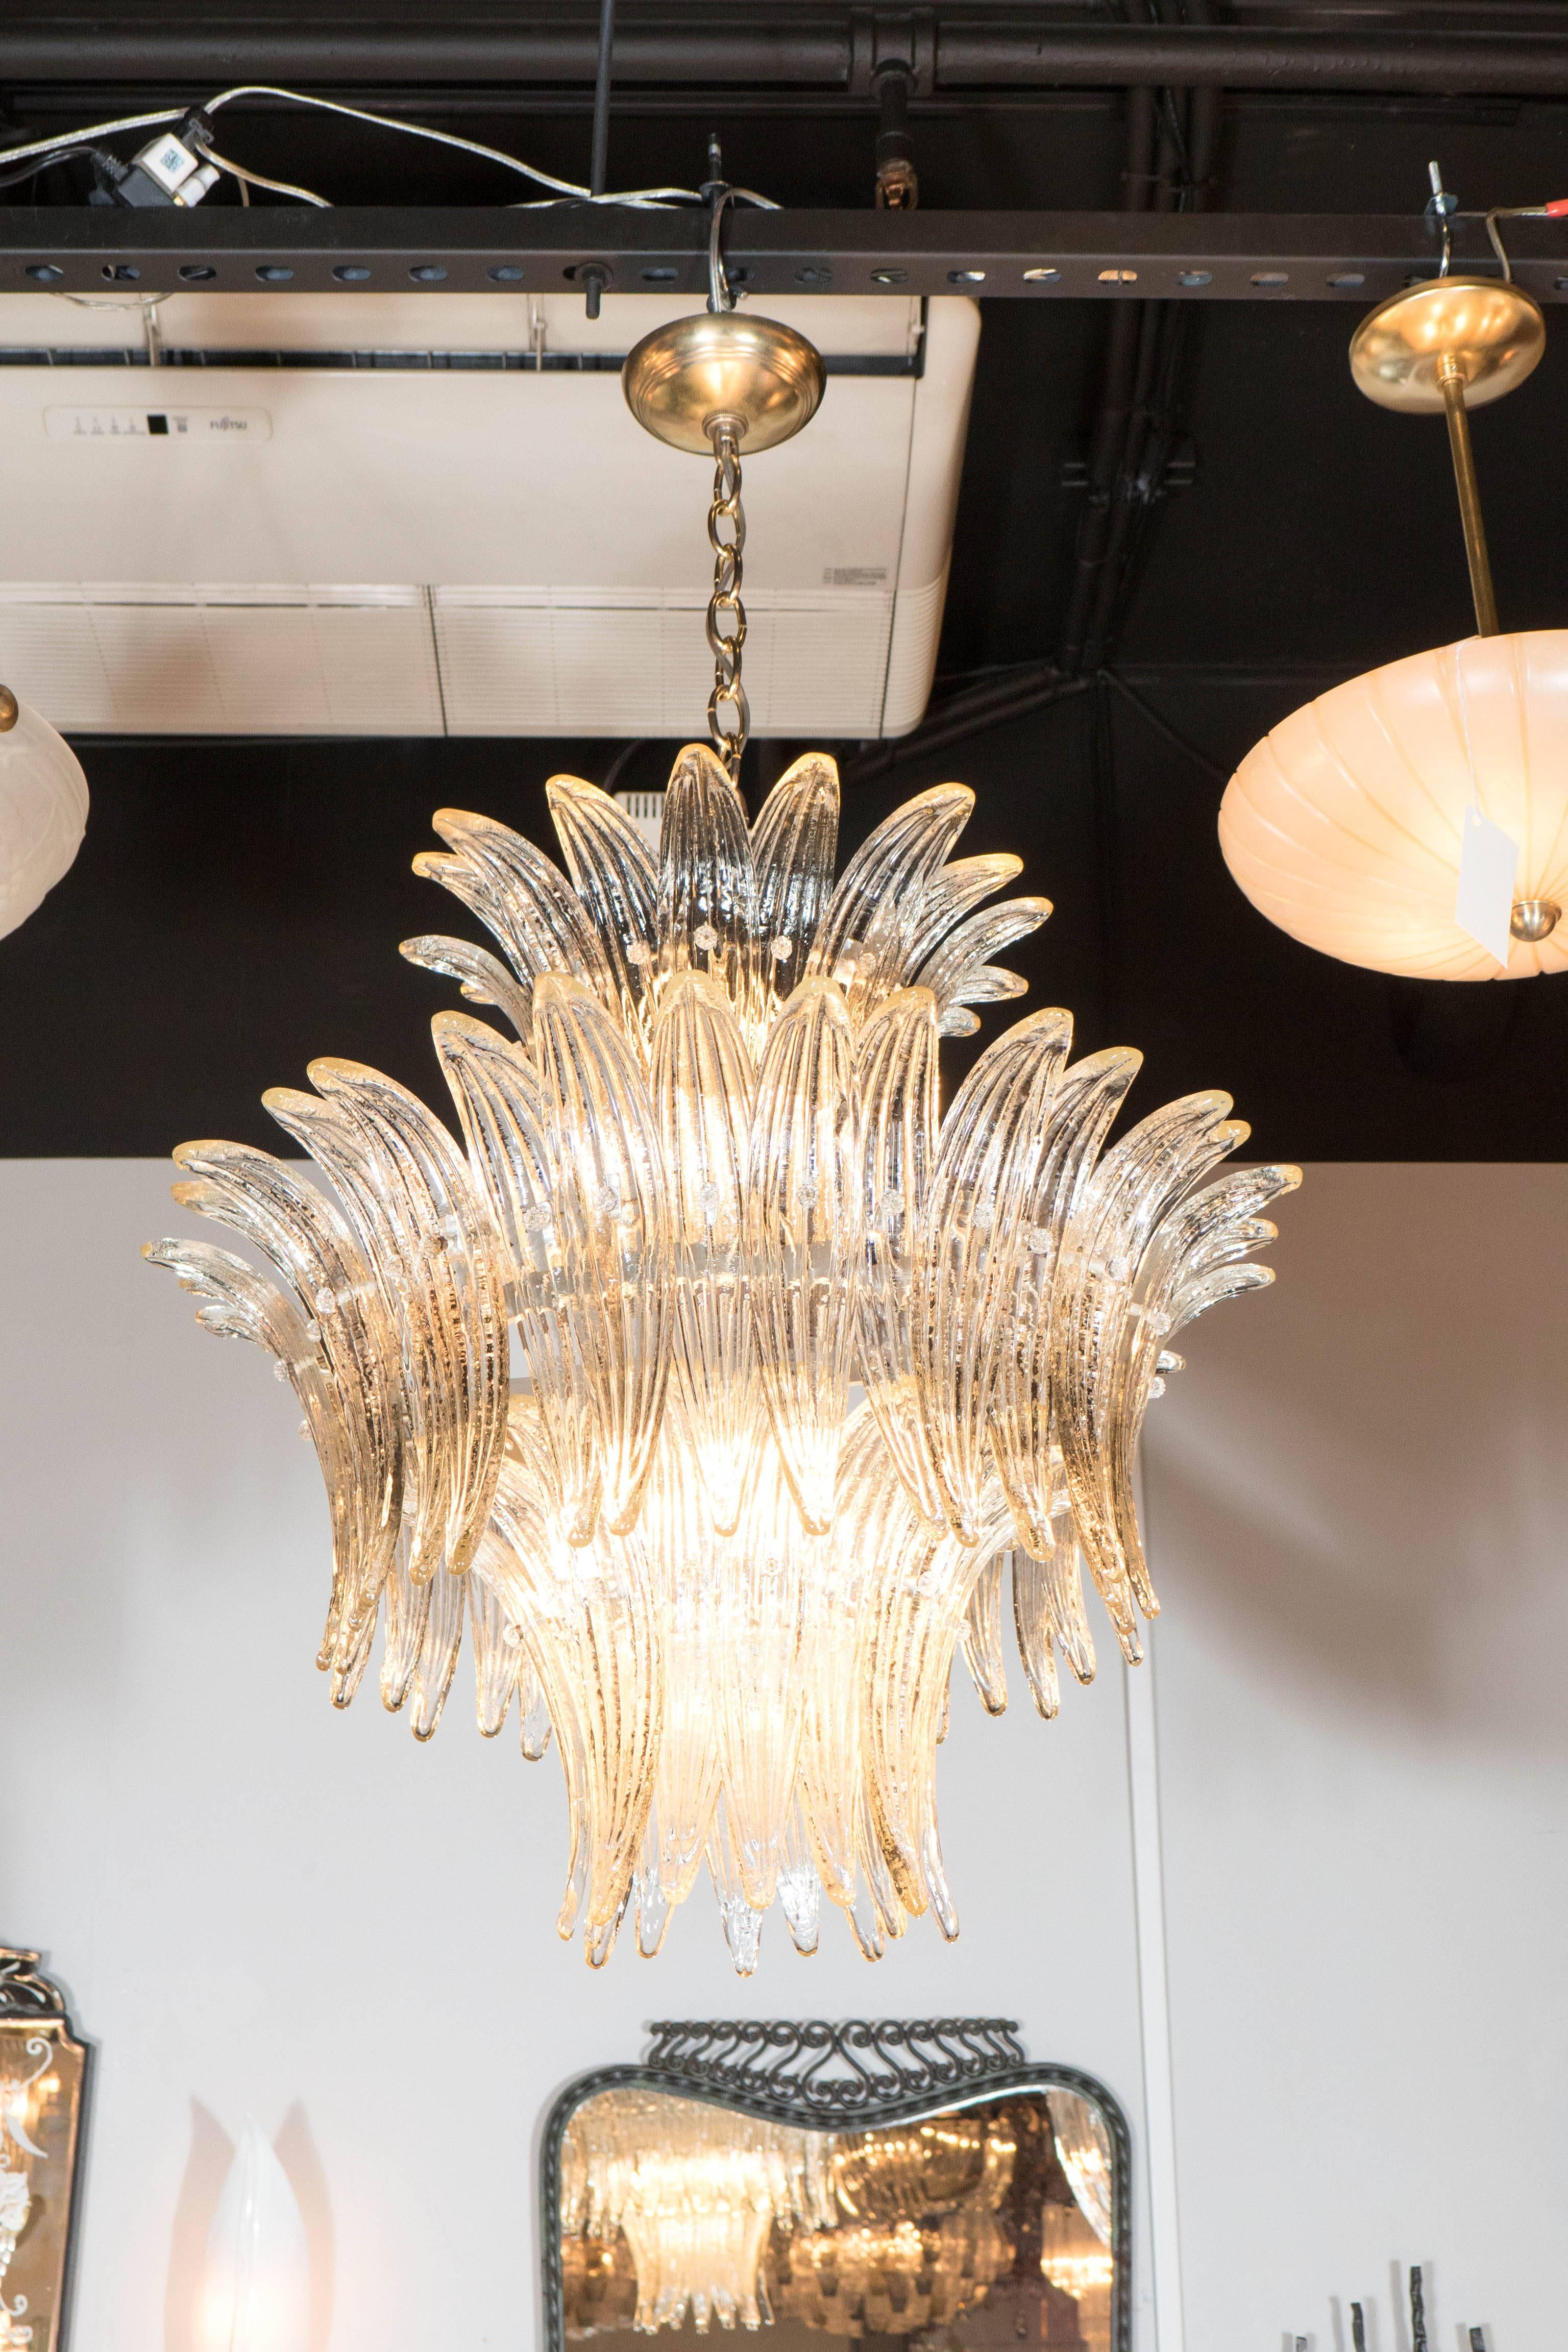 A truly exquisite three-tier Palma chandelier in smoked Murano glass with brass fittings. Individually attached 